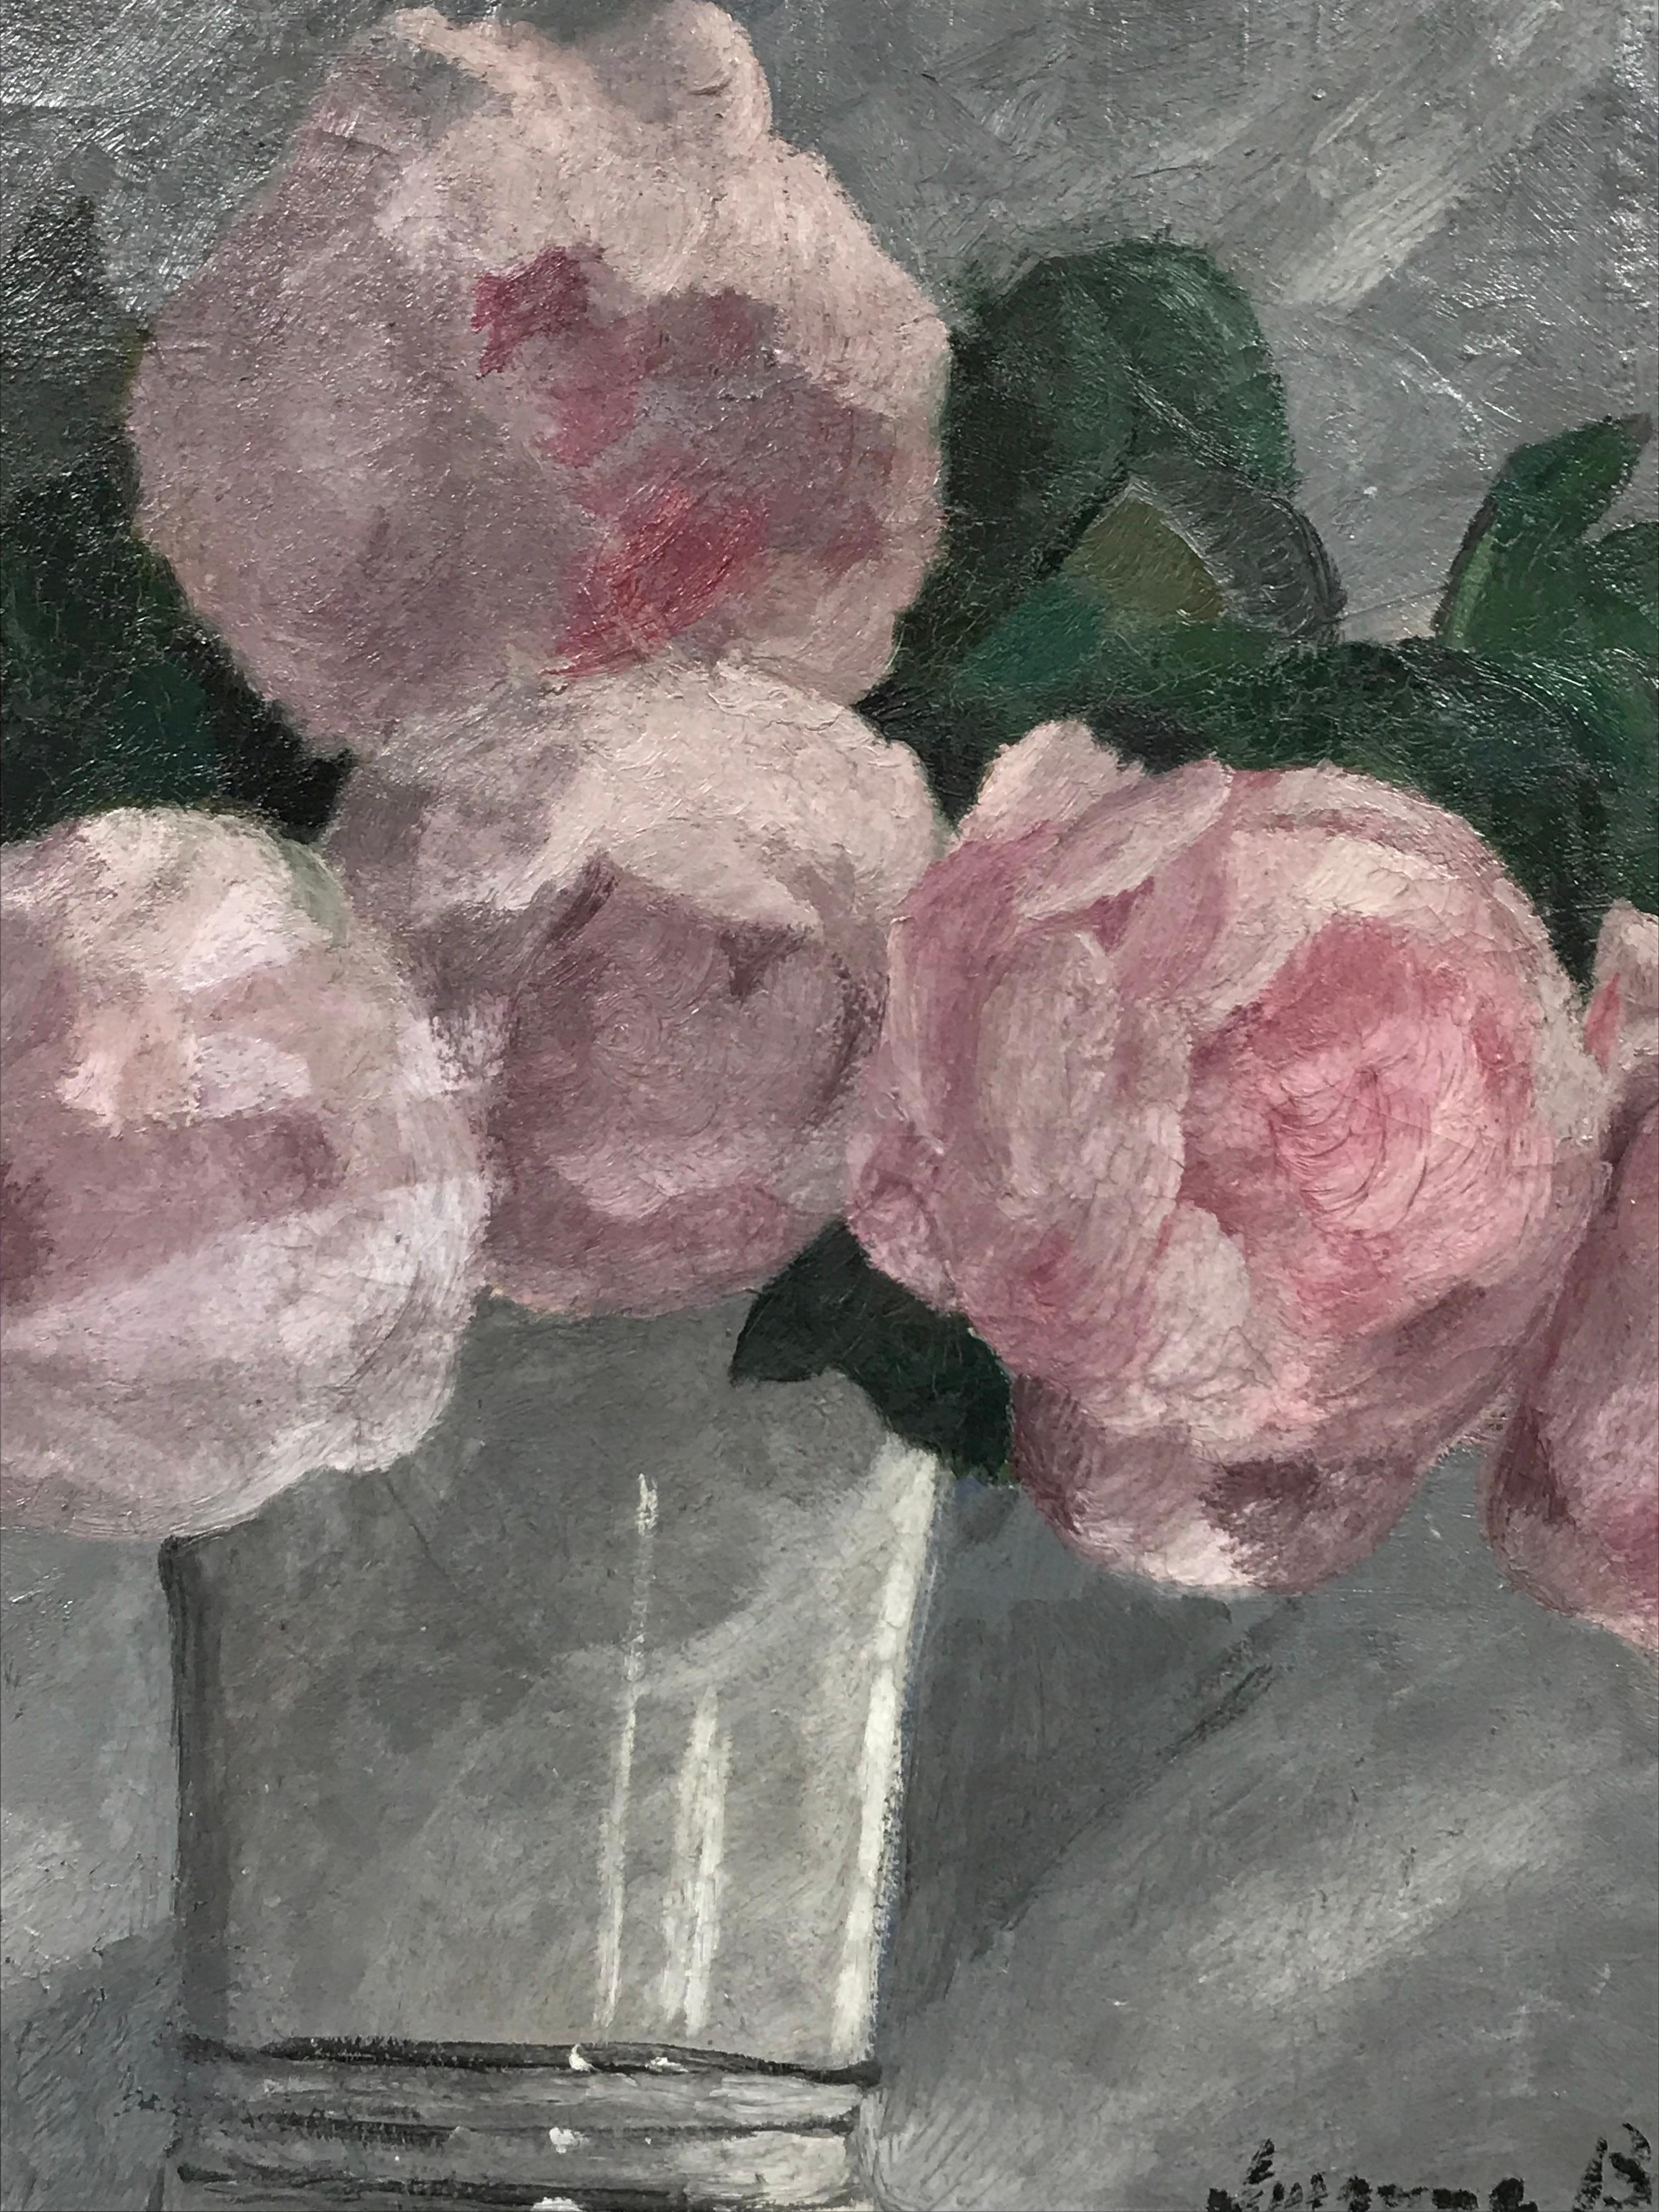 Artist/ School: Suzanne Bernouard, French, signed, dated 1924 verso

Title: Vase Bleu, titled to old exhibition label in Paris 1924, showing pink peonies in a grey blue vase. 

Medium: oil painting on canvas, unframed, signed

Size:

canvas: 18 x